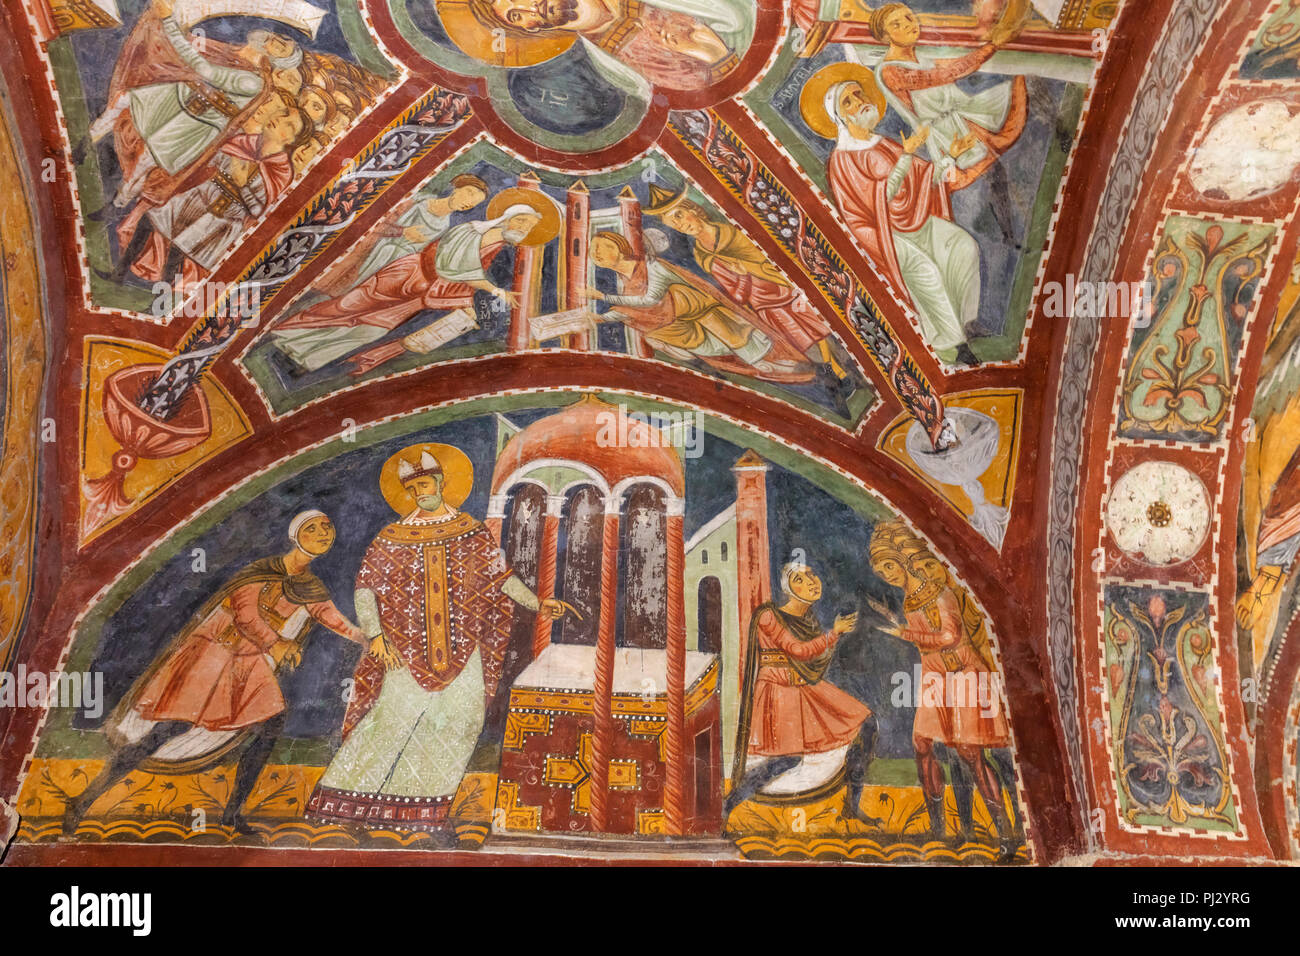 Fresco painting in the cathedral crypt, Anagni, Frosinone, Lazio, Italy  Stock Photo - Alamy